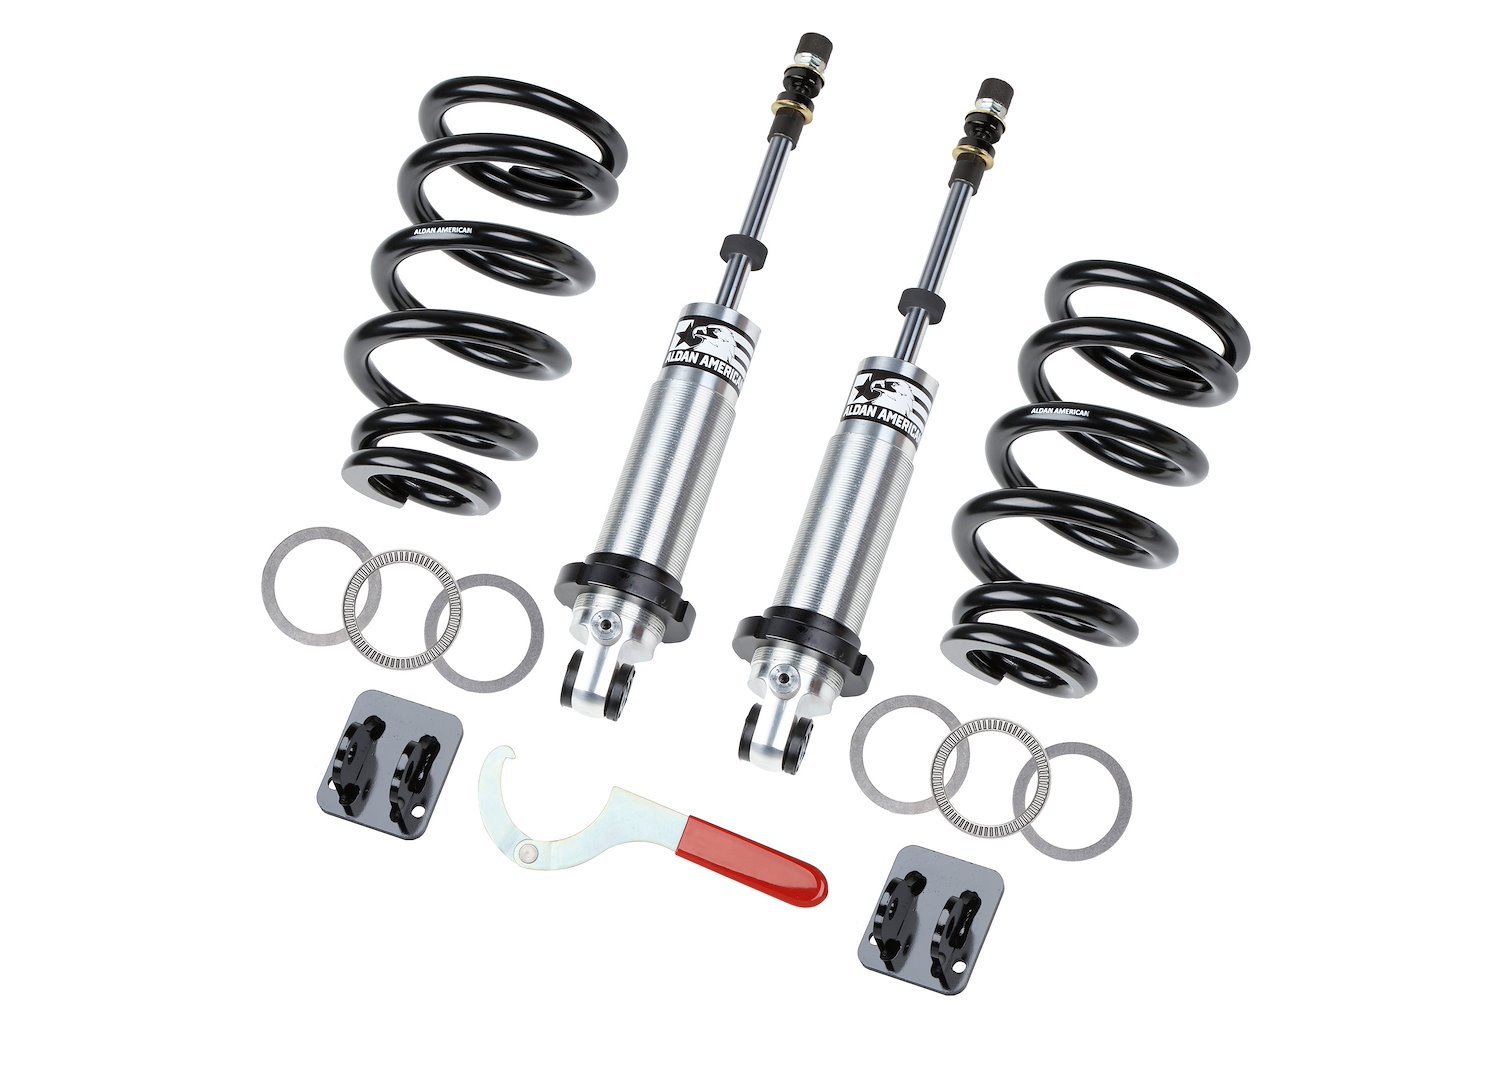 RCX-Series Front Coil-Over Kit 1999-2006 GM 1500 Pickup Truck [Spring Rate: 700 lbs./in.]